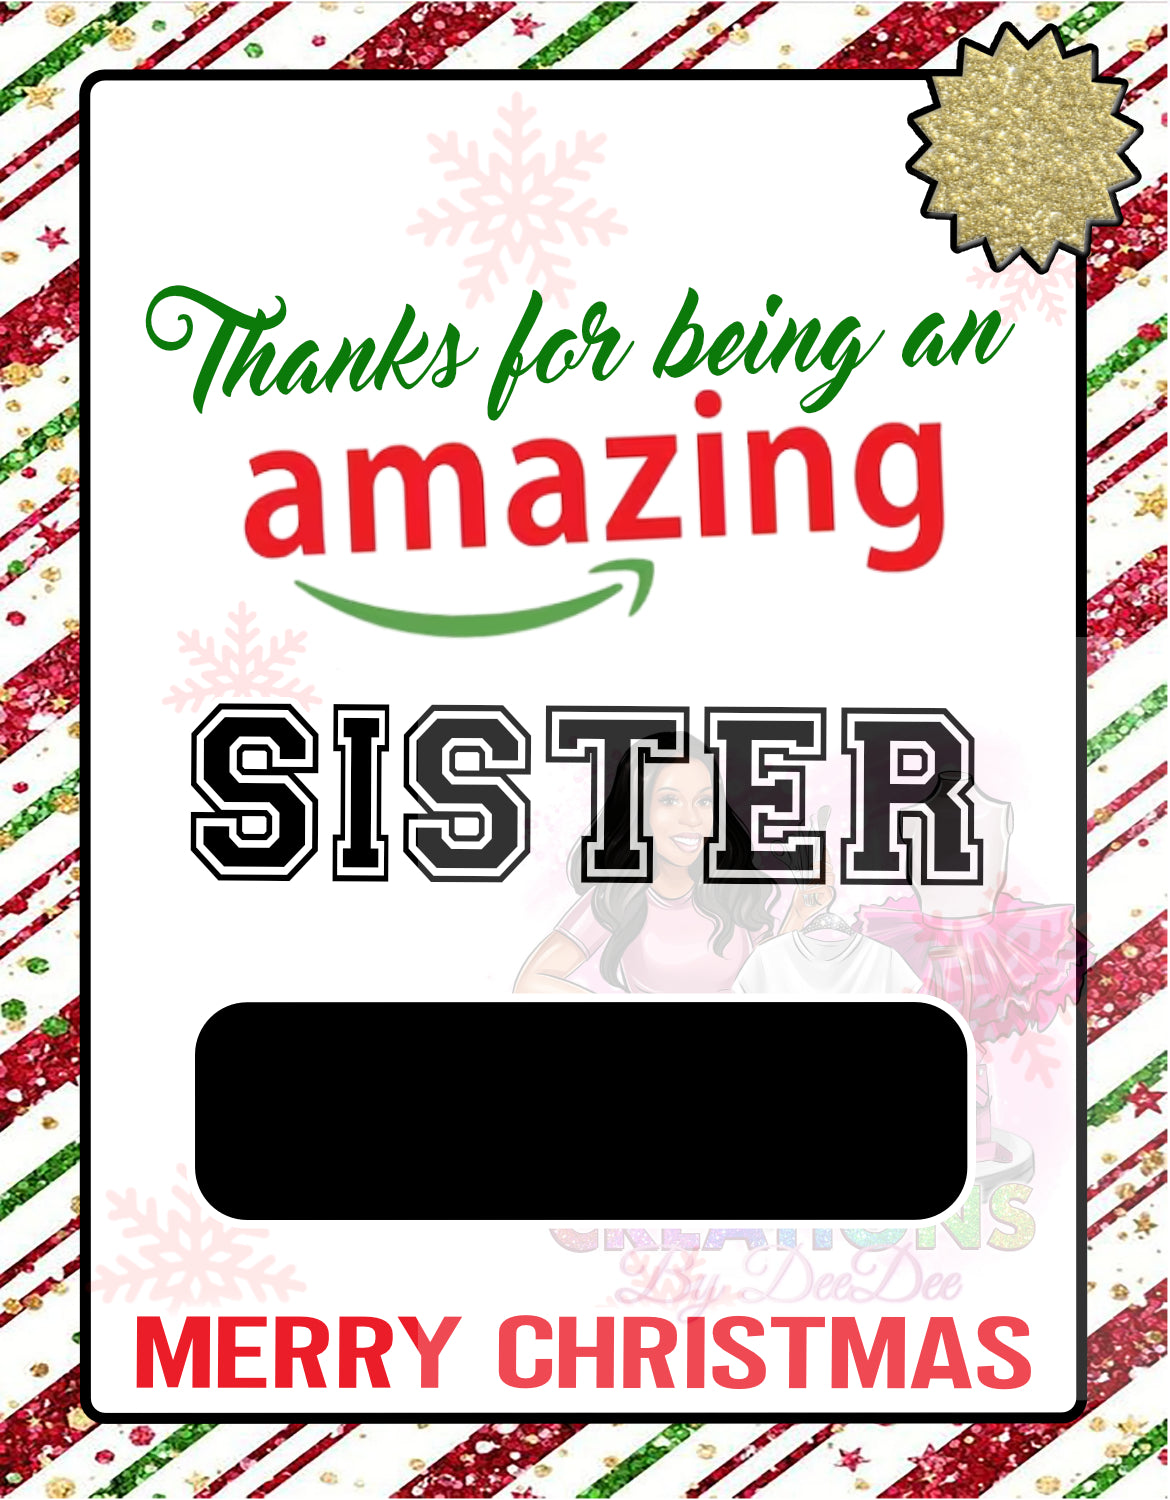 Thanks for being an amazing Sister - Money holder card